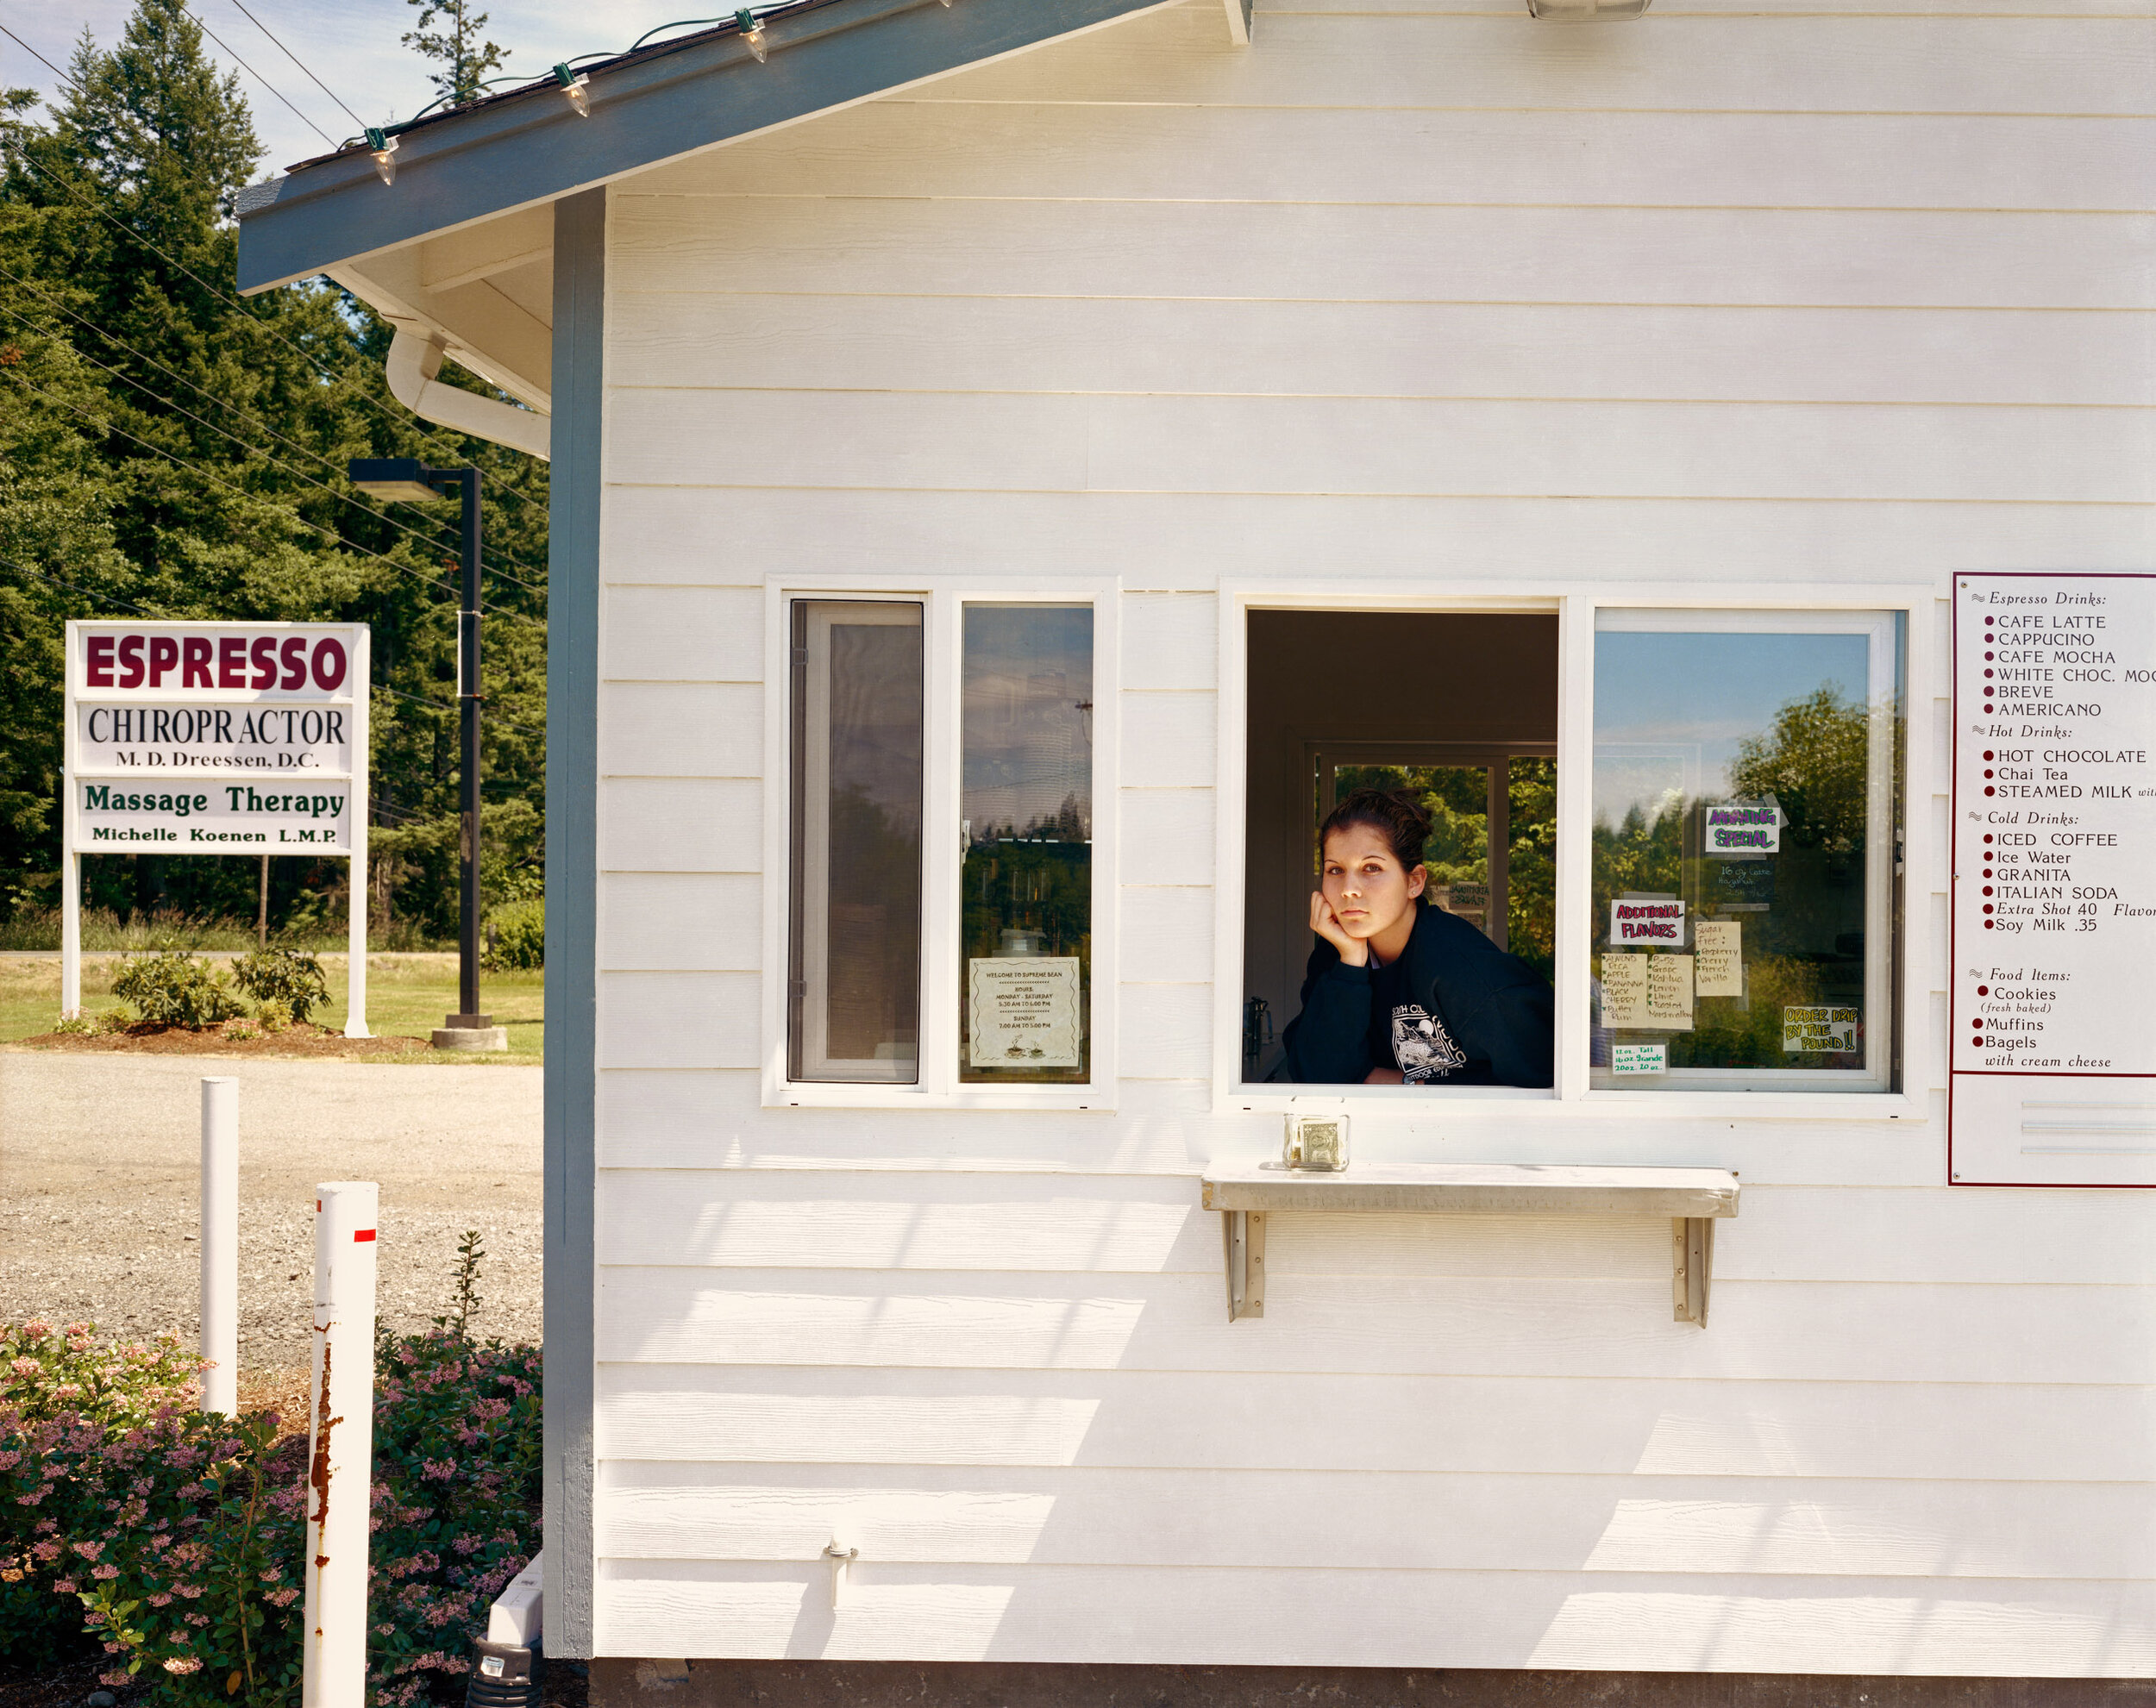 A Woman Working at the Supreme Bean, Port Orchard, Washington, August 2000